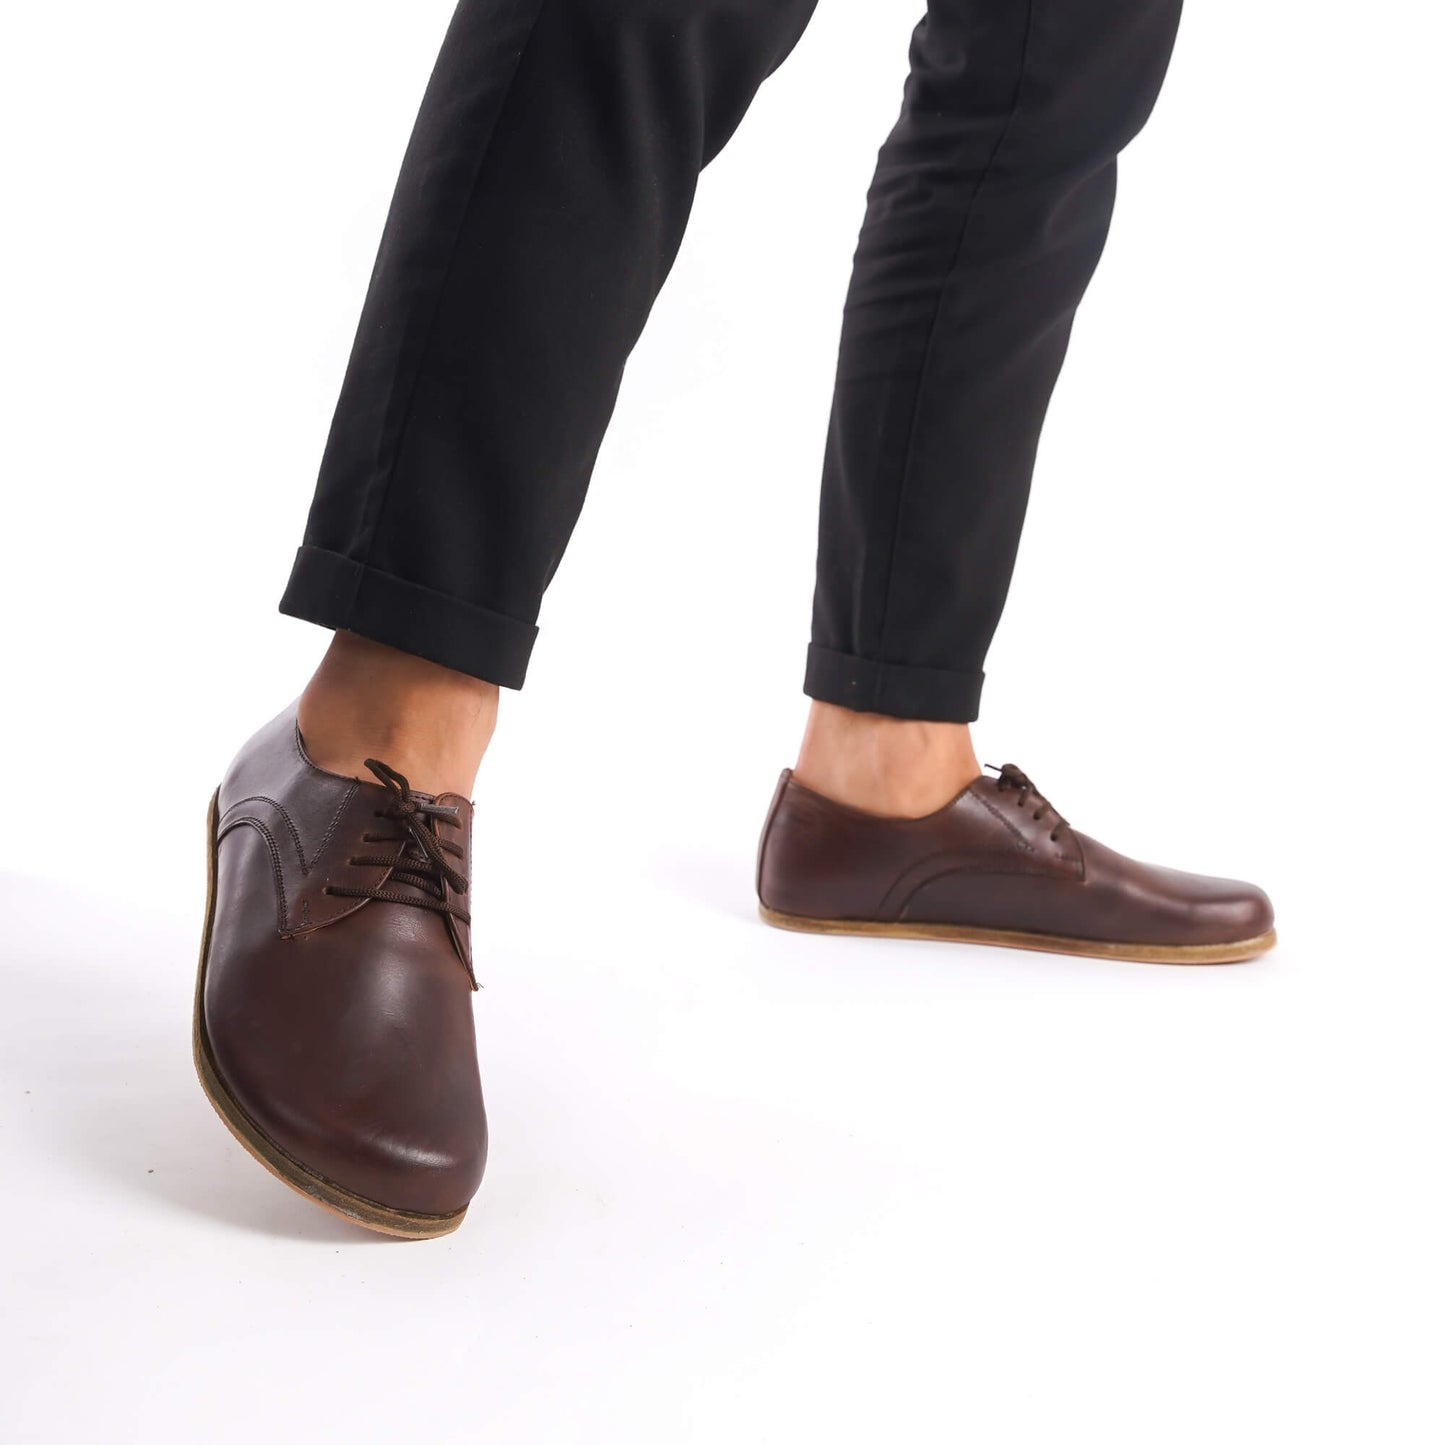 Walking shot of Locris Leather Barefoot Men's Oxfords in brown, showing their flexibility and lightweight construction.